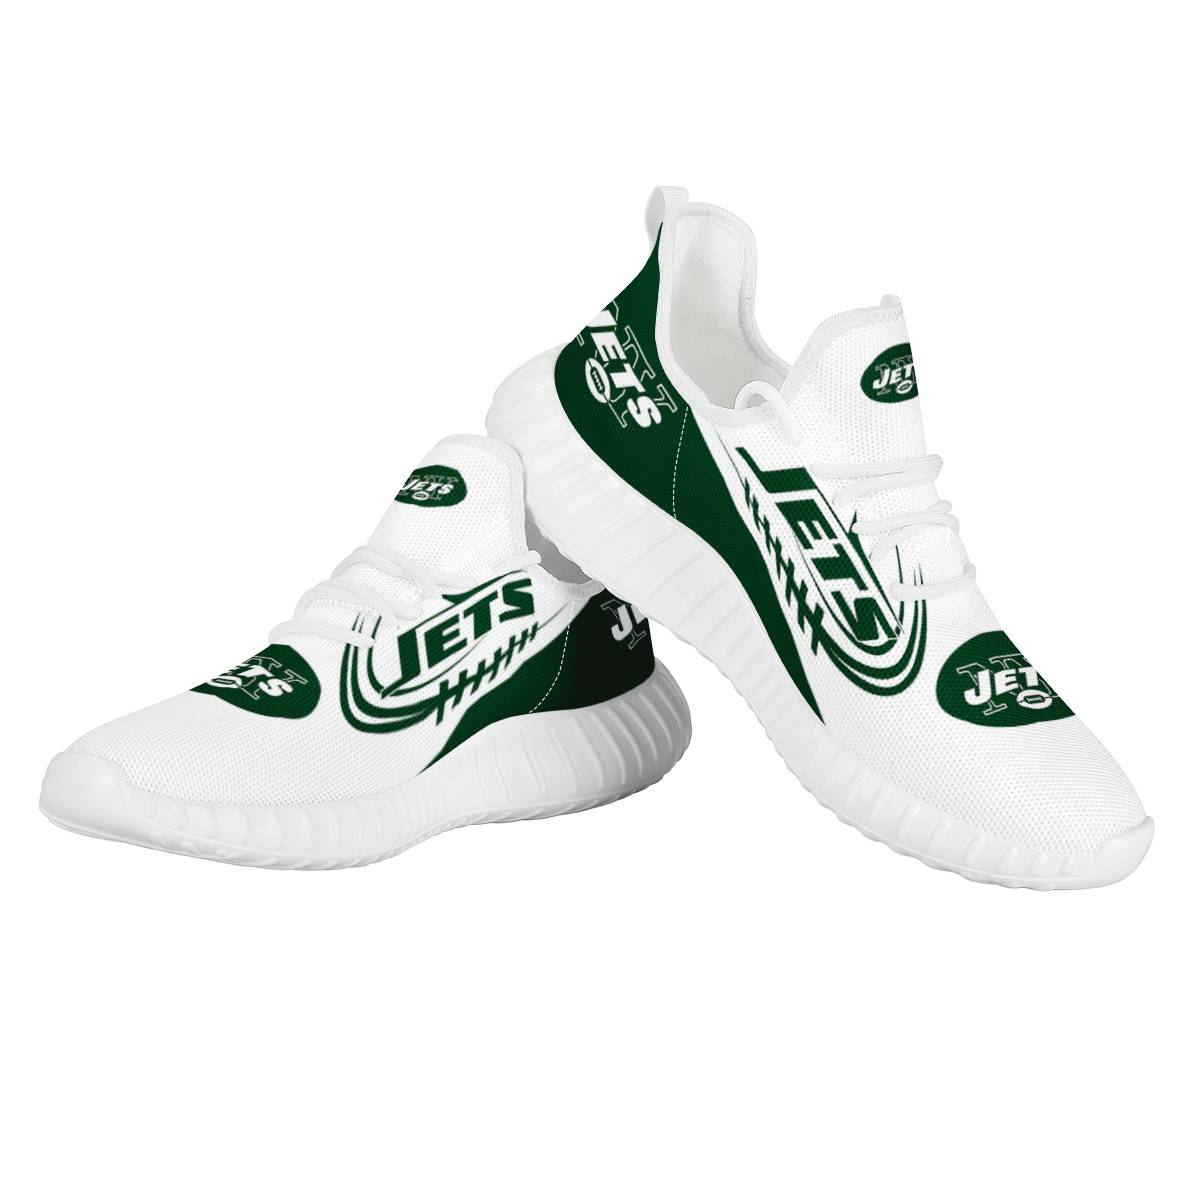 Men's NFL New York Jets Mesh Knit Sneakers/Shoes 004